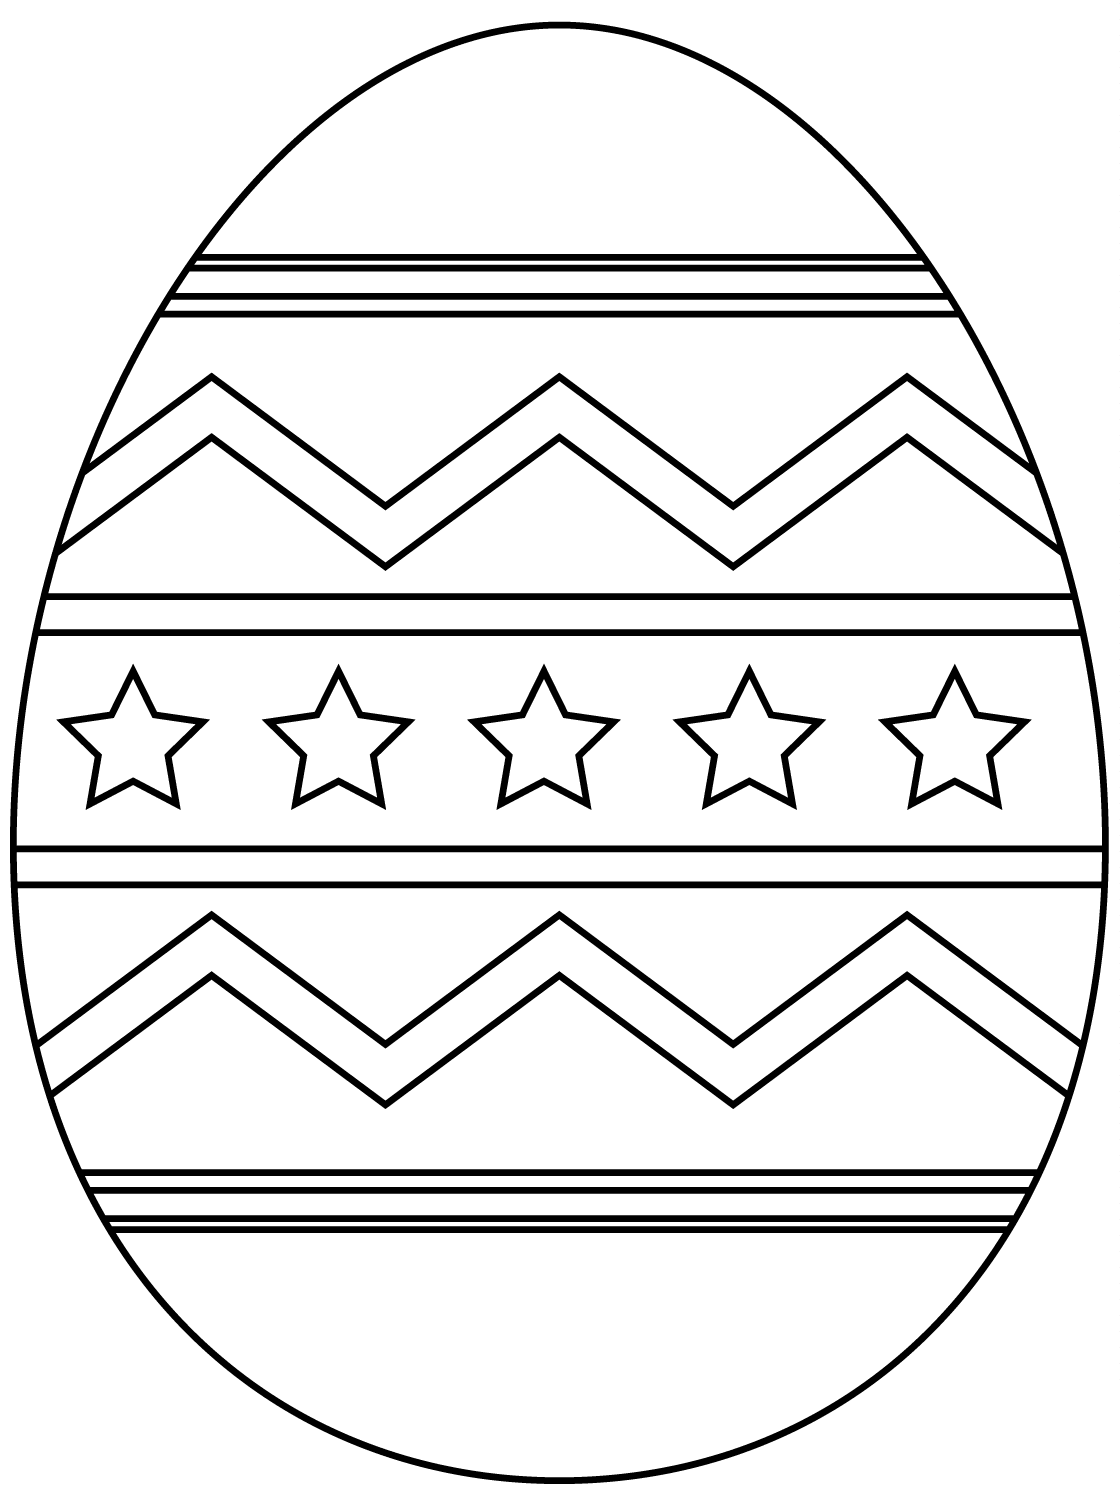 Easter Egg With Abstract Pattern 2 1 Coloring Page